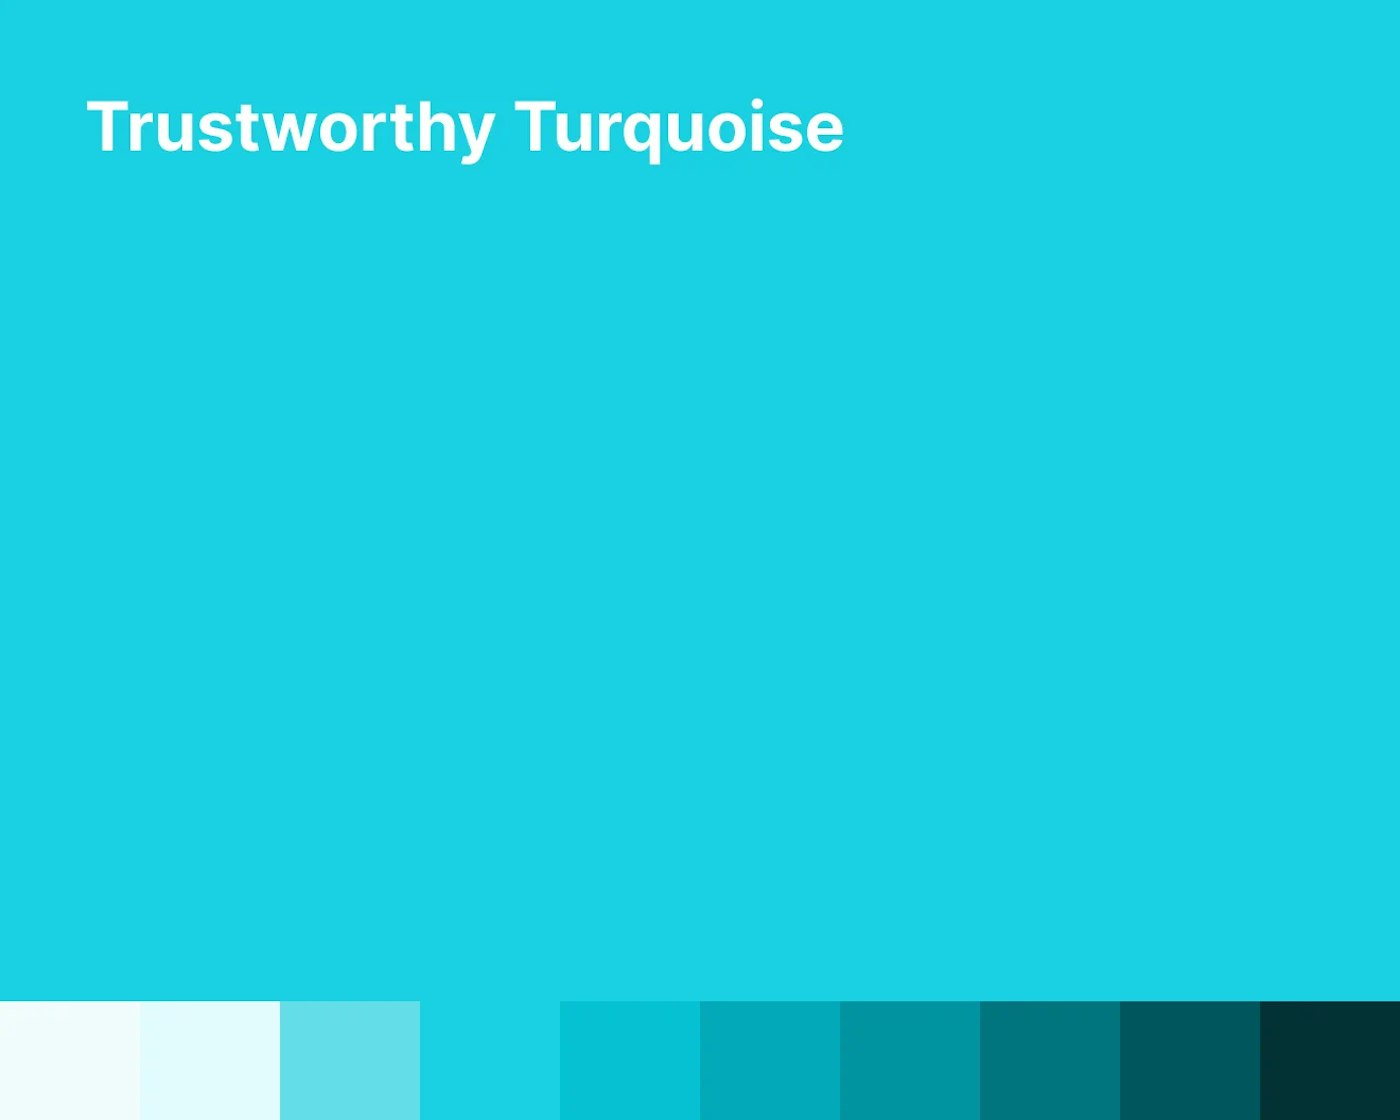 Brand color palette named Trustworthy Turquoise